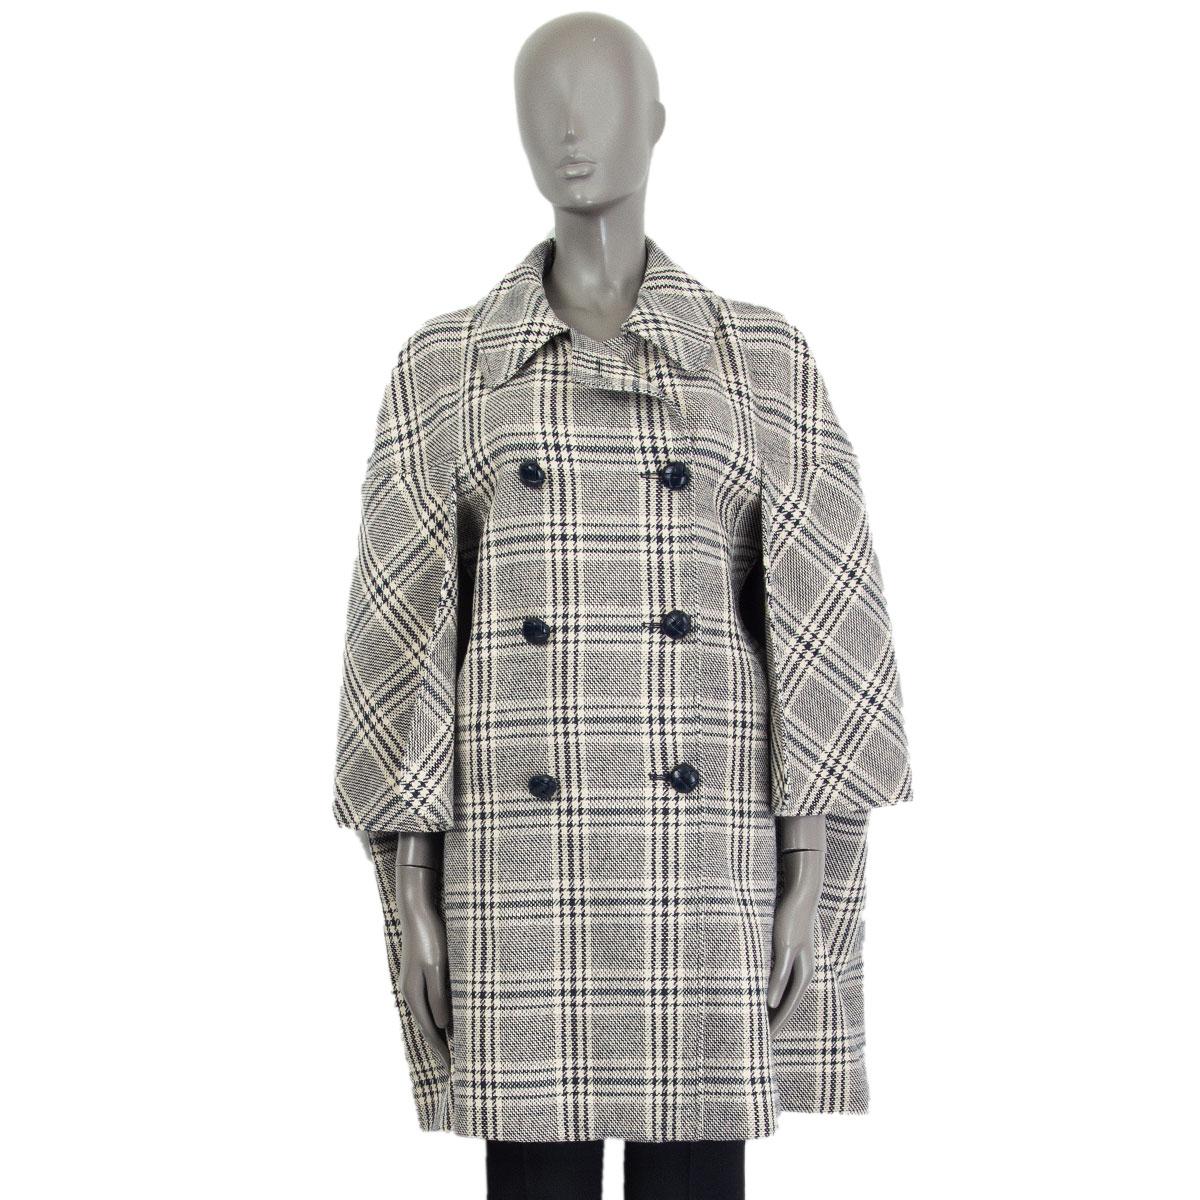 Gucci check madras cape in ivory and dark blue wool (54%), cotton (33%), linen (7%), polyamide (6%) with a flat collar, dropped shoulder silhouette and embellished with a metallic embroidered eagle patch on the back. Closes on the front with